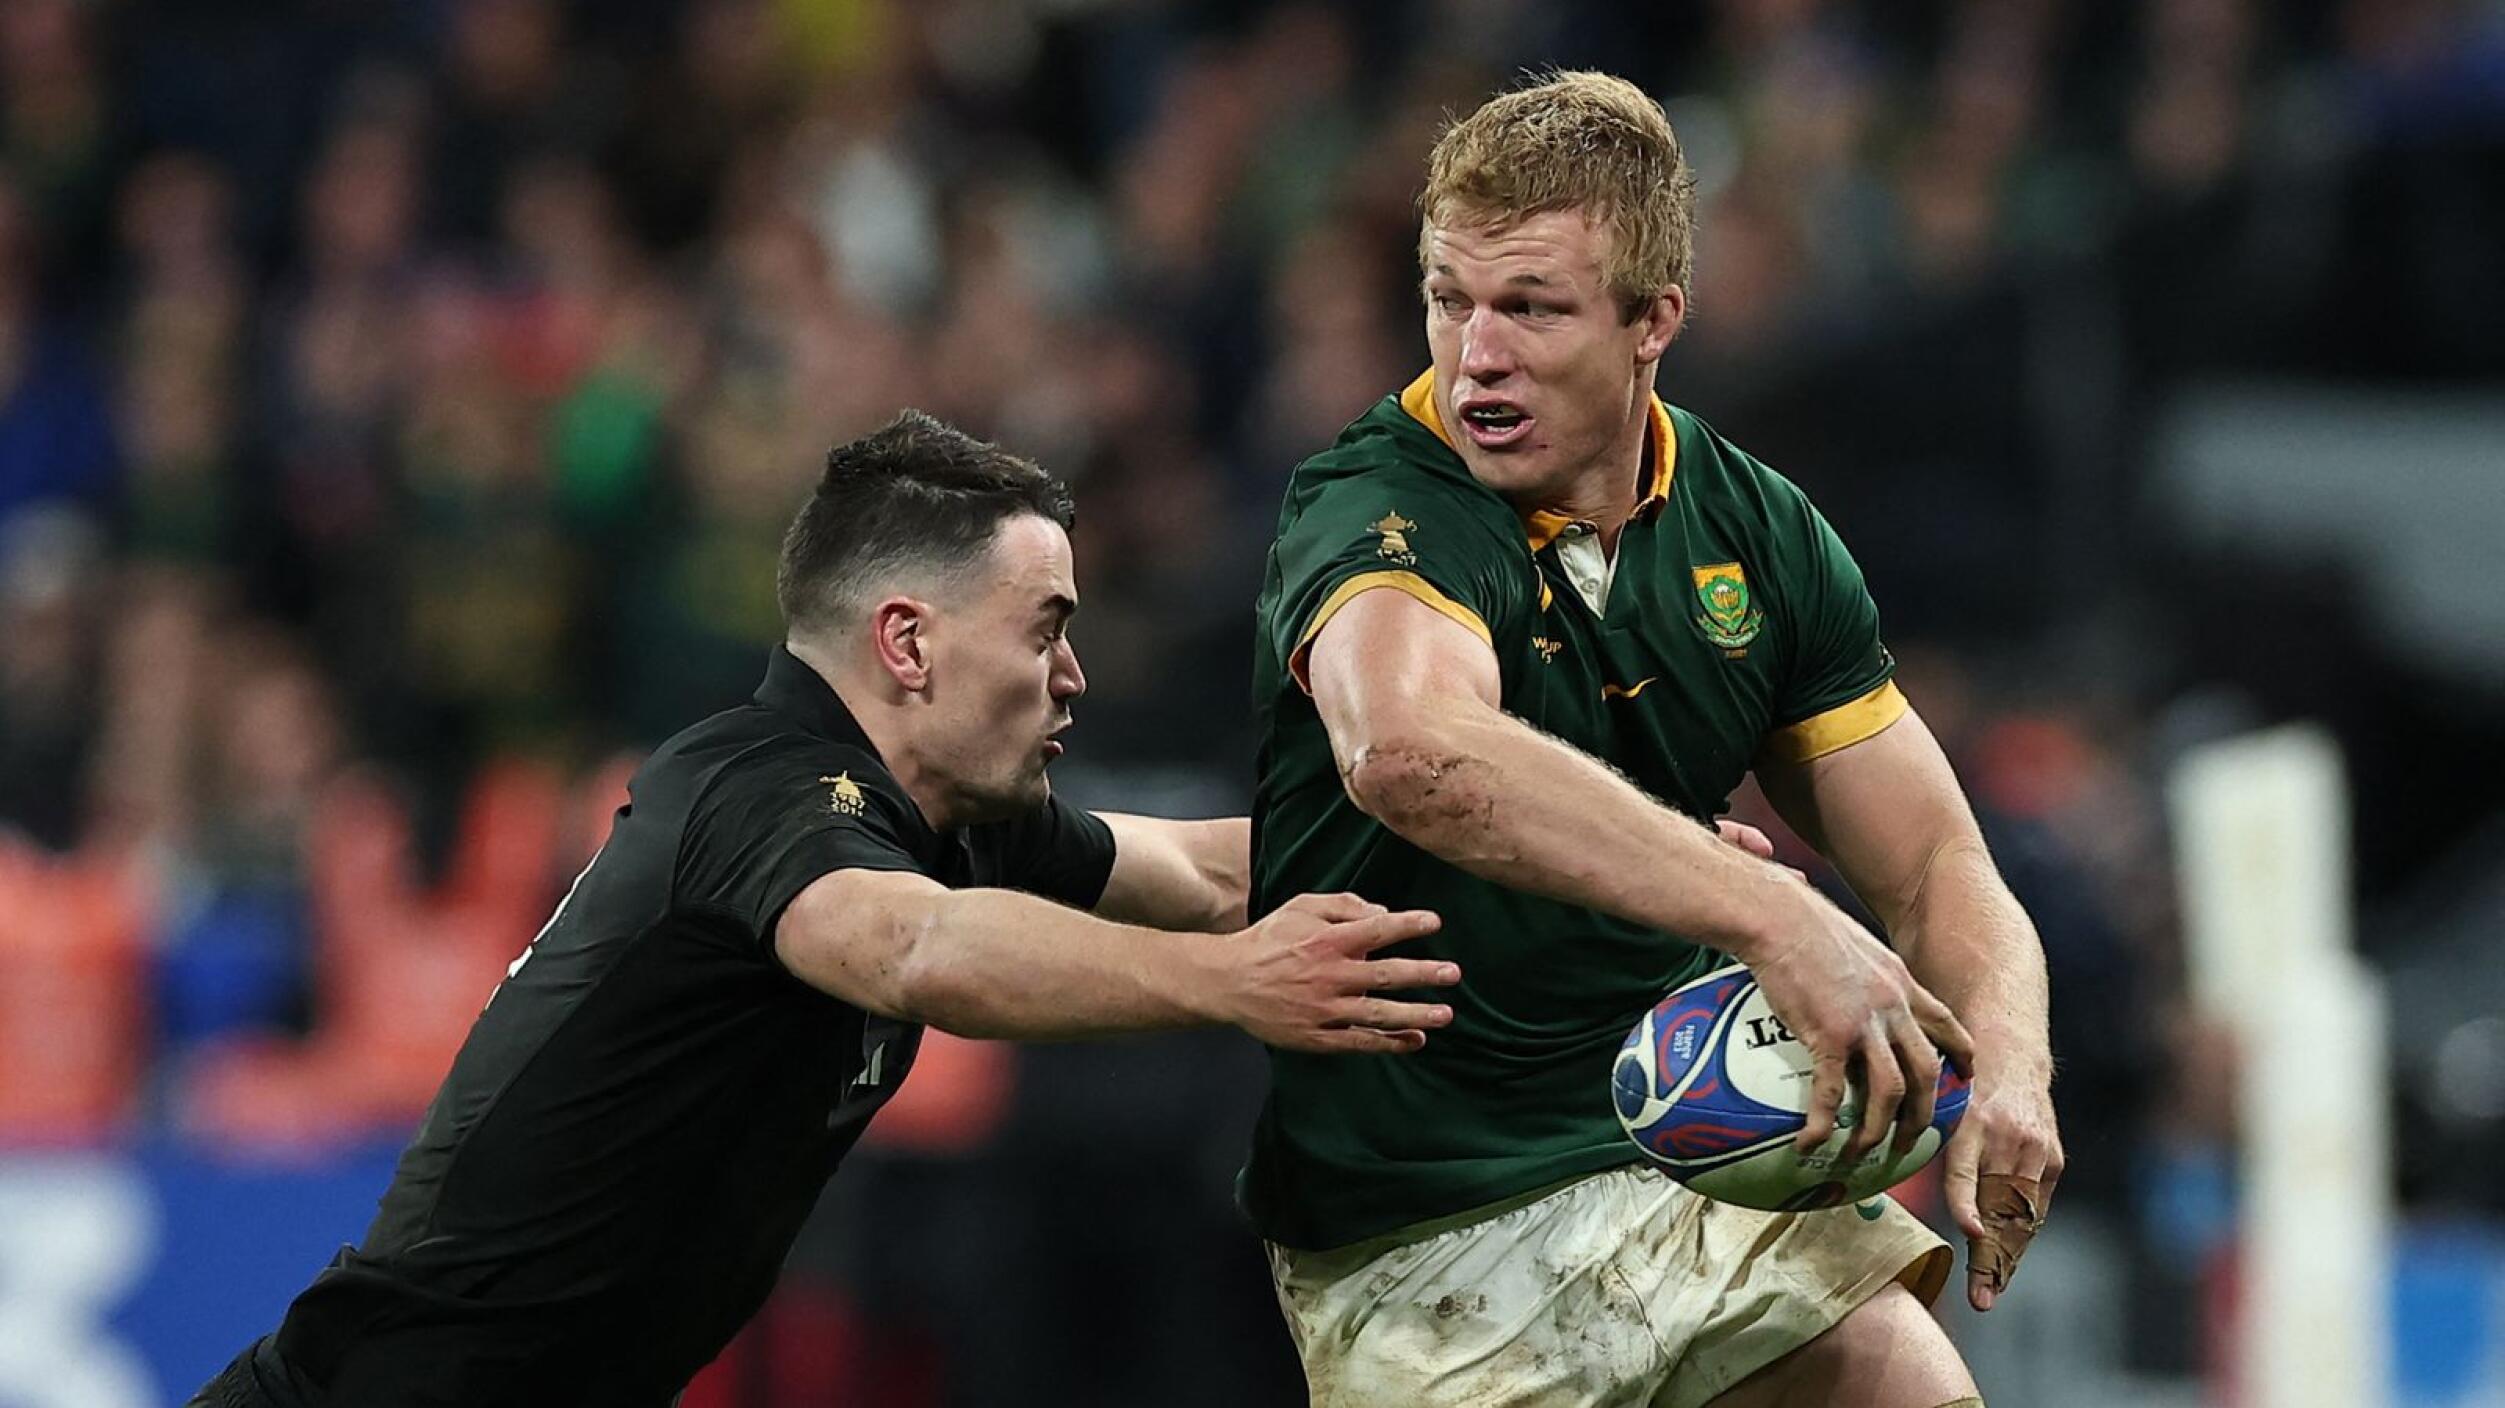 South Africa's Pieter-Steph du Toid carries the ball during Saturday’s Rugby World Cup final against New Zealand at Stade de France in Paris